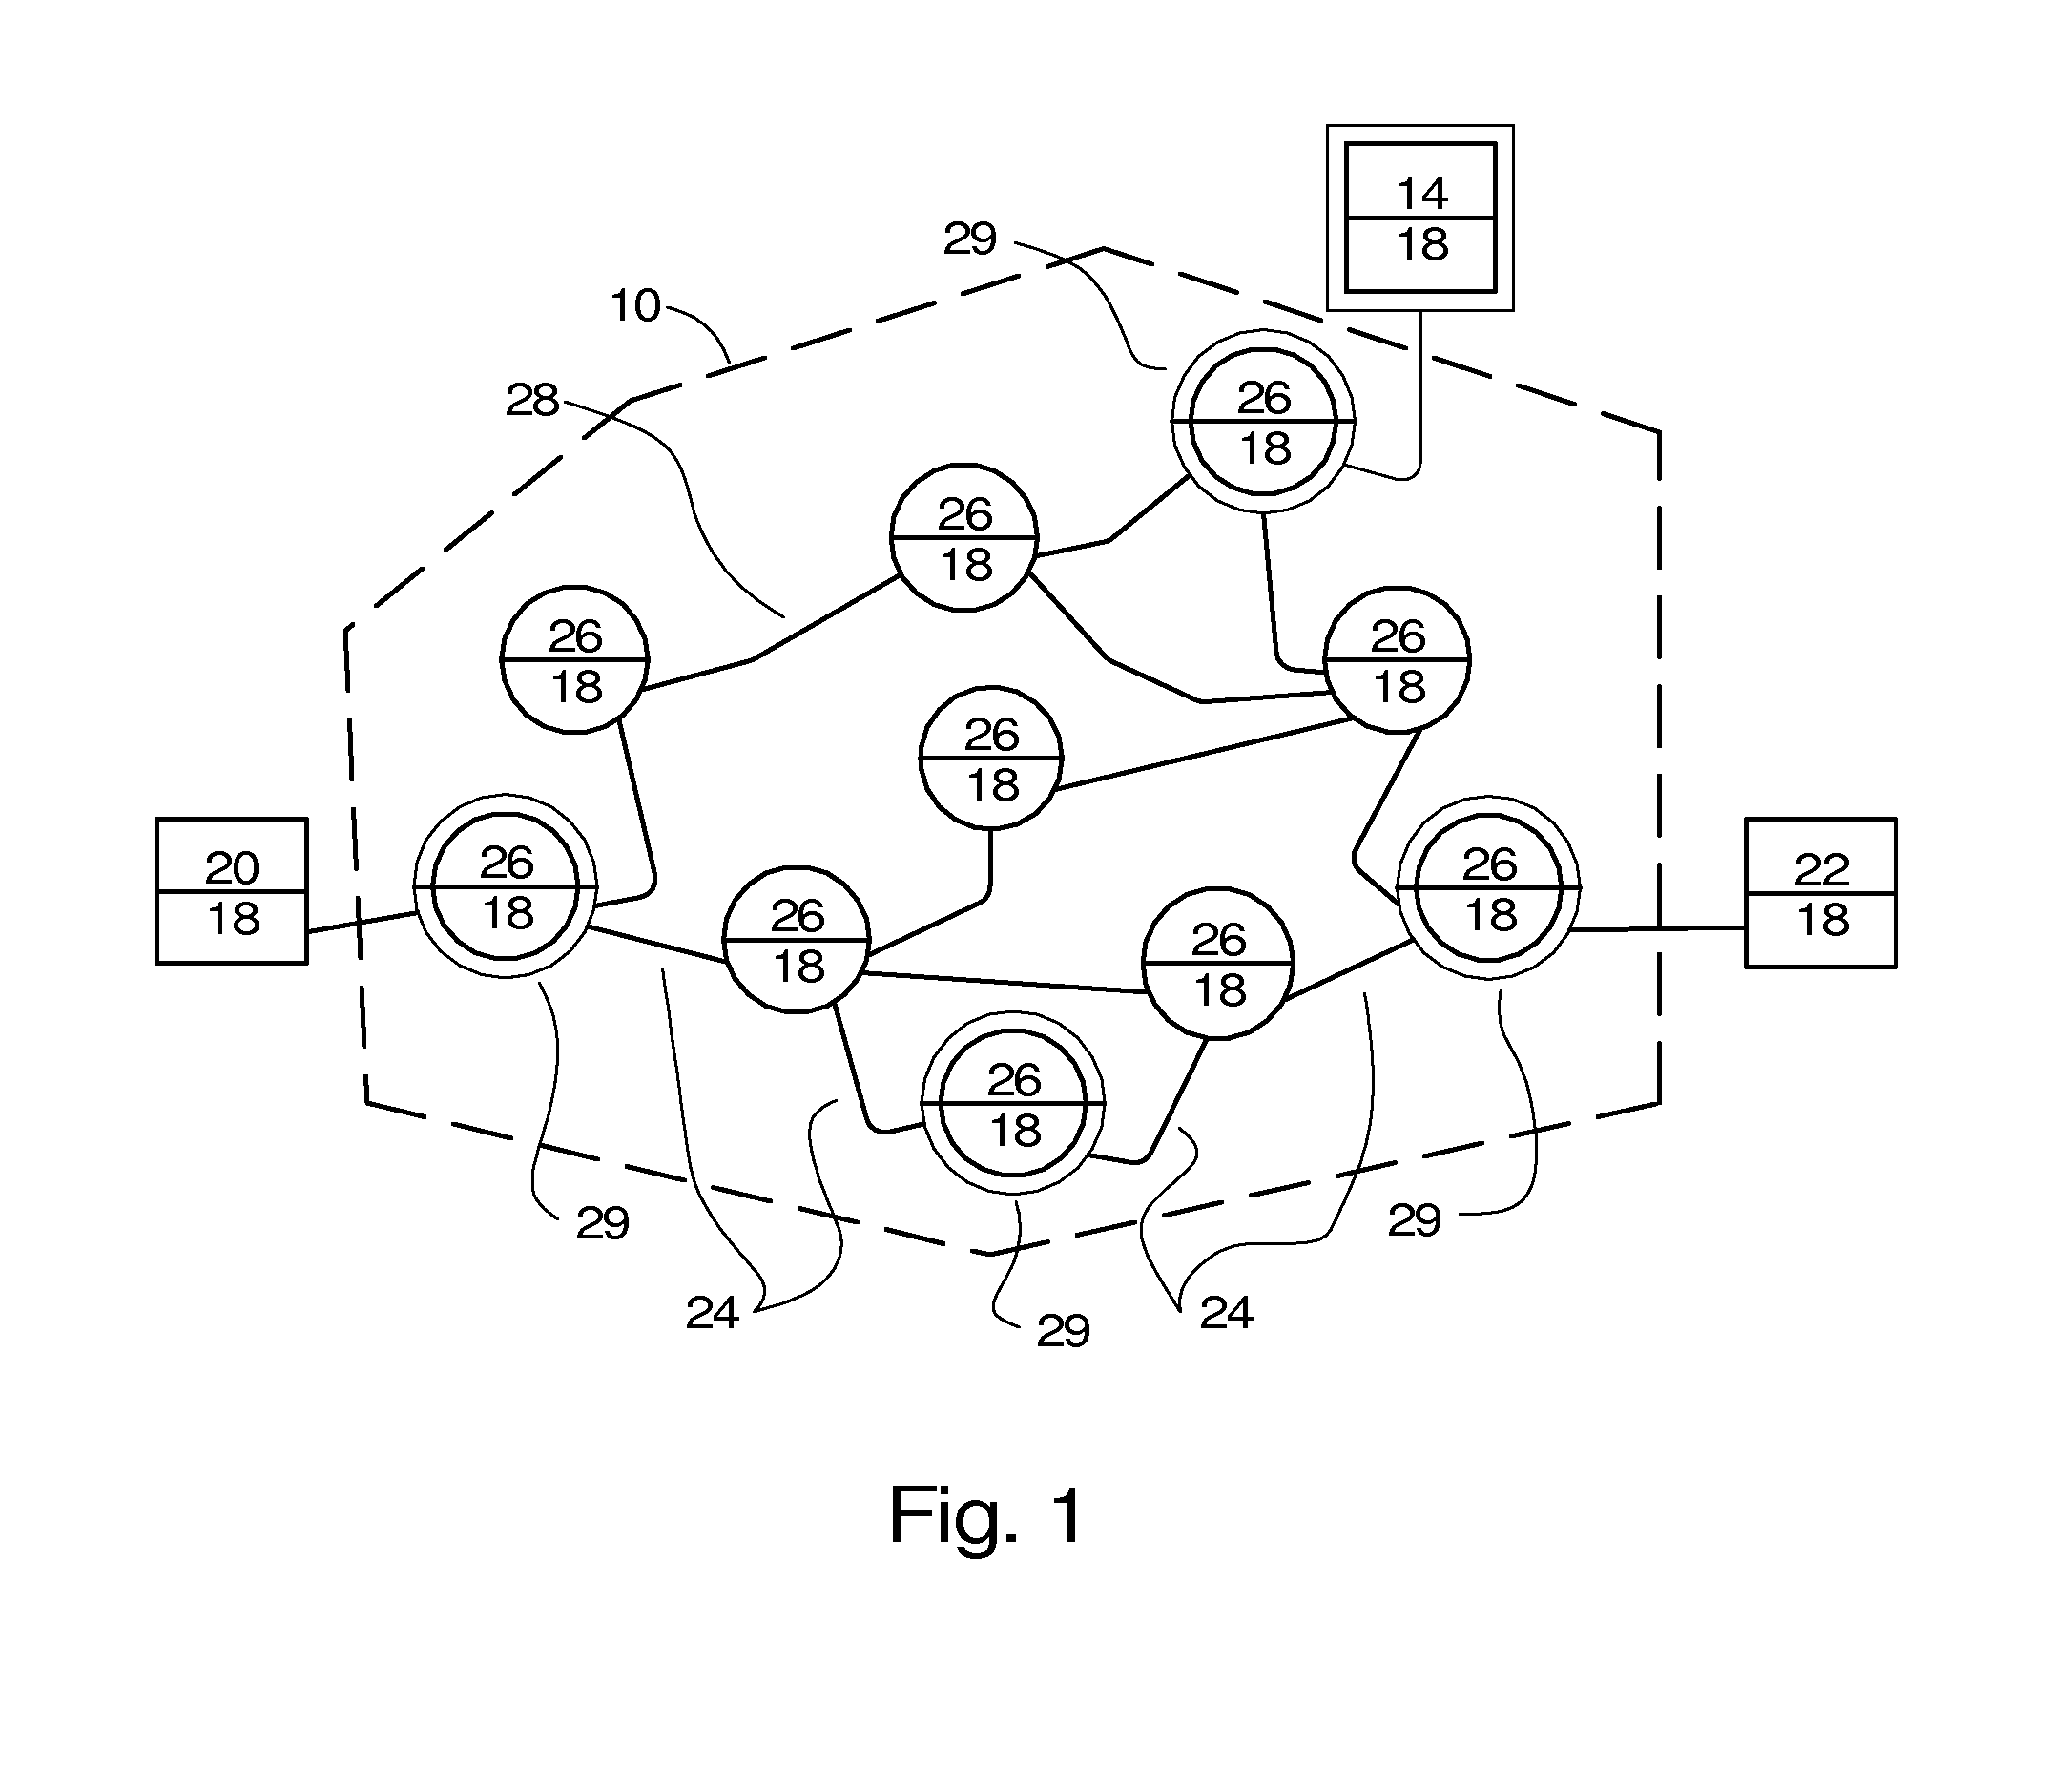 Method for routing data over a telecommunications network